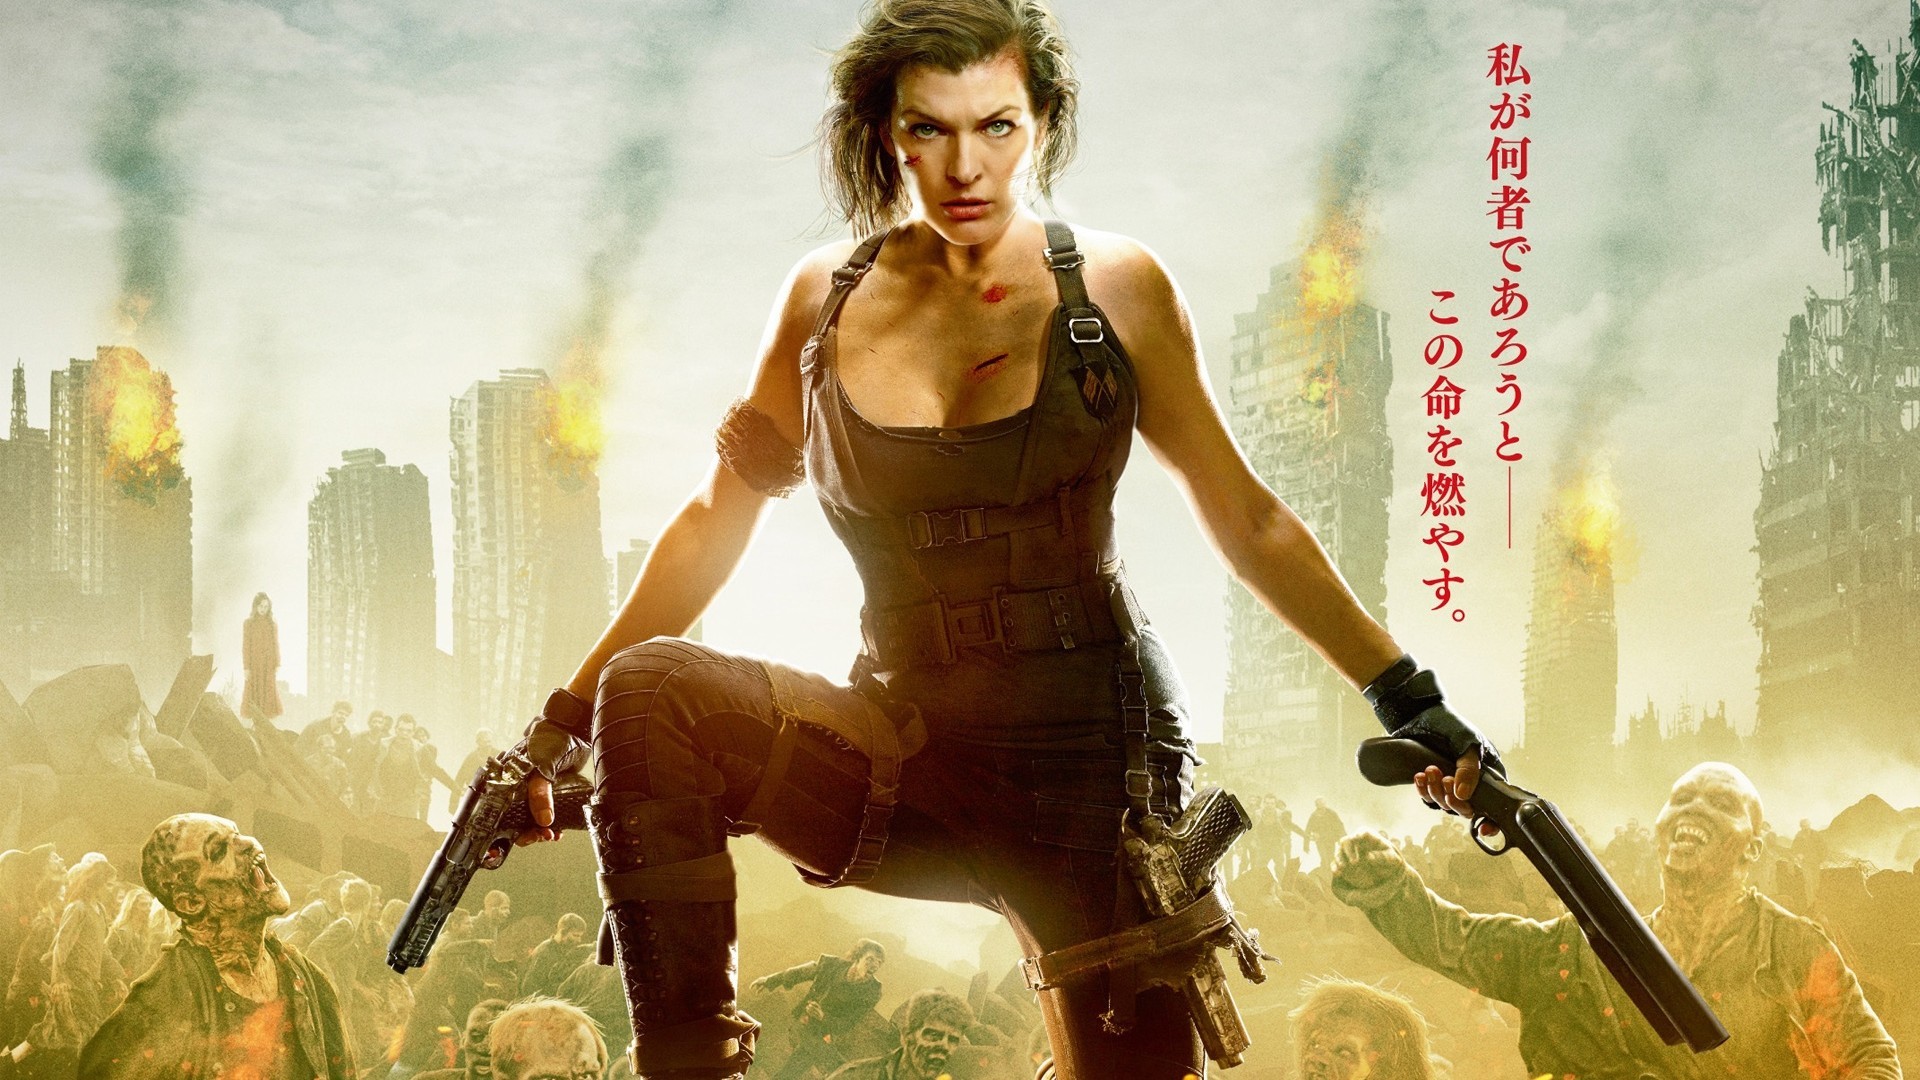 Resident Evil The Final Chapter, Milla Jovovich